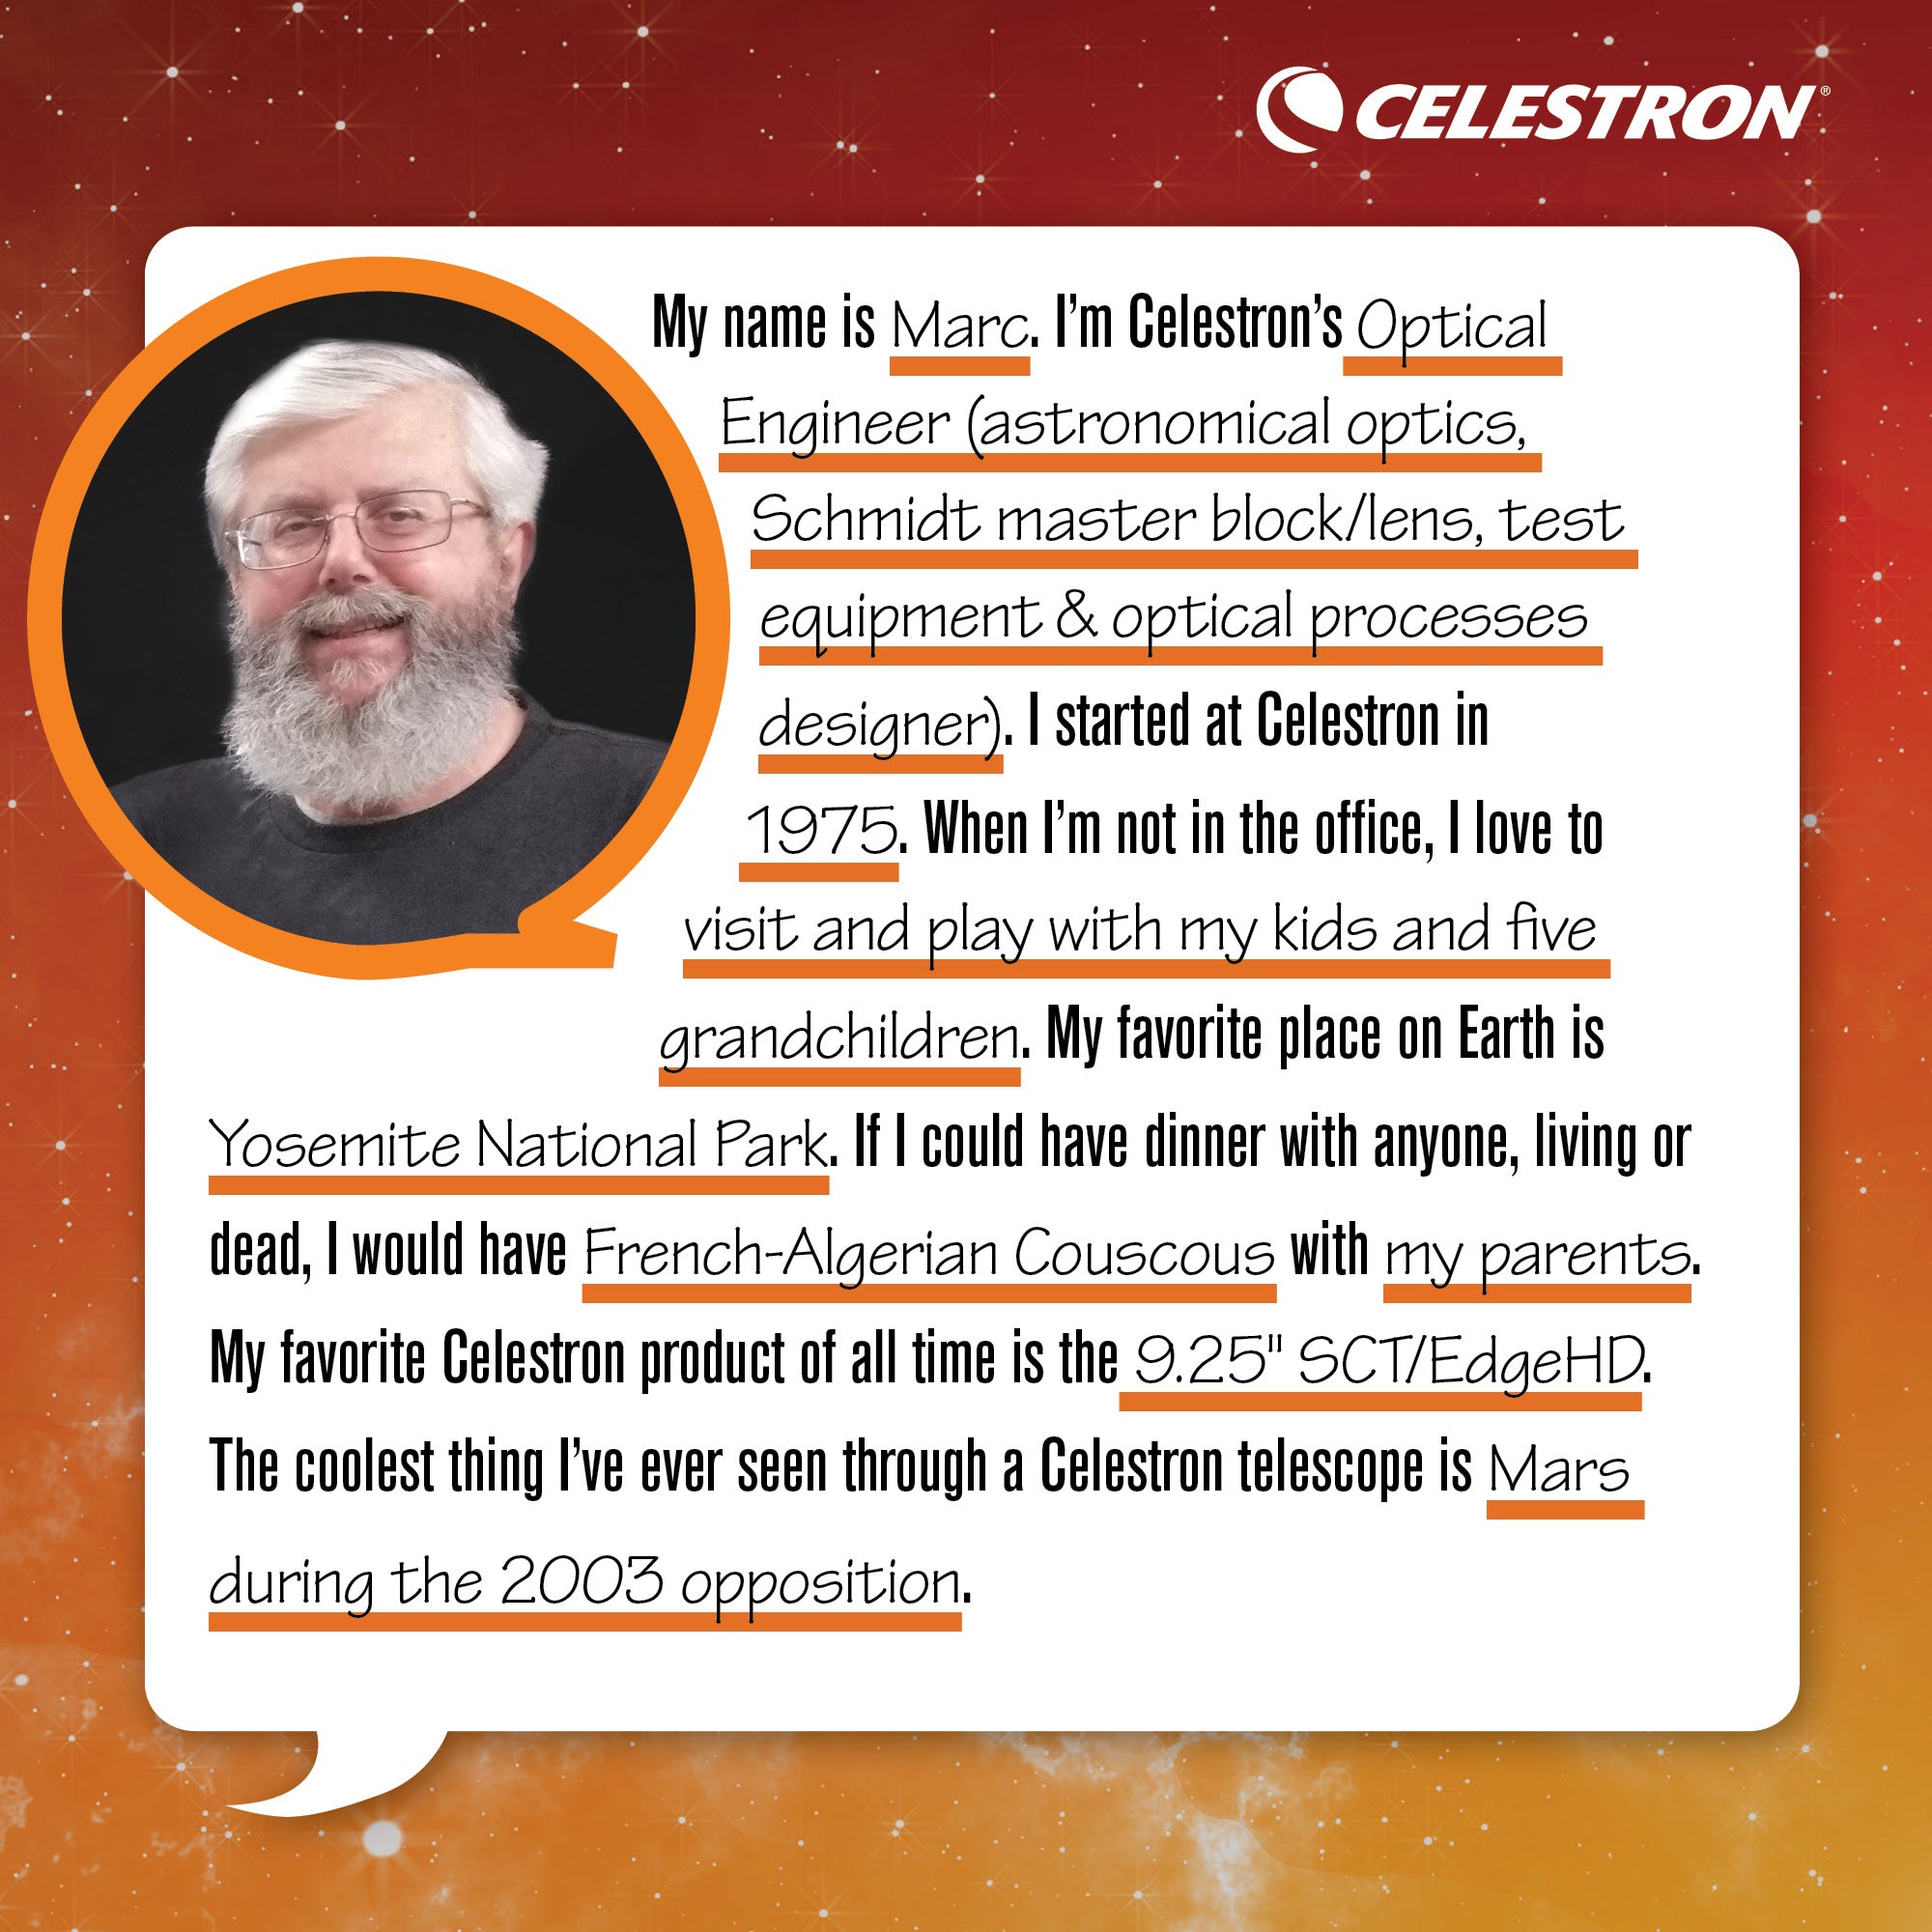 My name is Marc. I'm Celestron's Optical Engineer (astronomical optics, Schmidt master block/lens, test equipment and optical processes designer). I started at Celestron in 1975. When I'm not in the office, I love to visit and play with my kids and five grandchildren.  My favorite place on Earth is Yosemite National Park. If I could have dinner with anyone, living or dead, I would have French-Algerian Couscous with my parents. My favorite Celestron product of all time is the 9.25